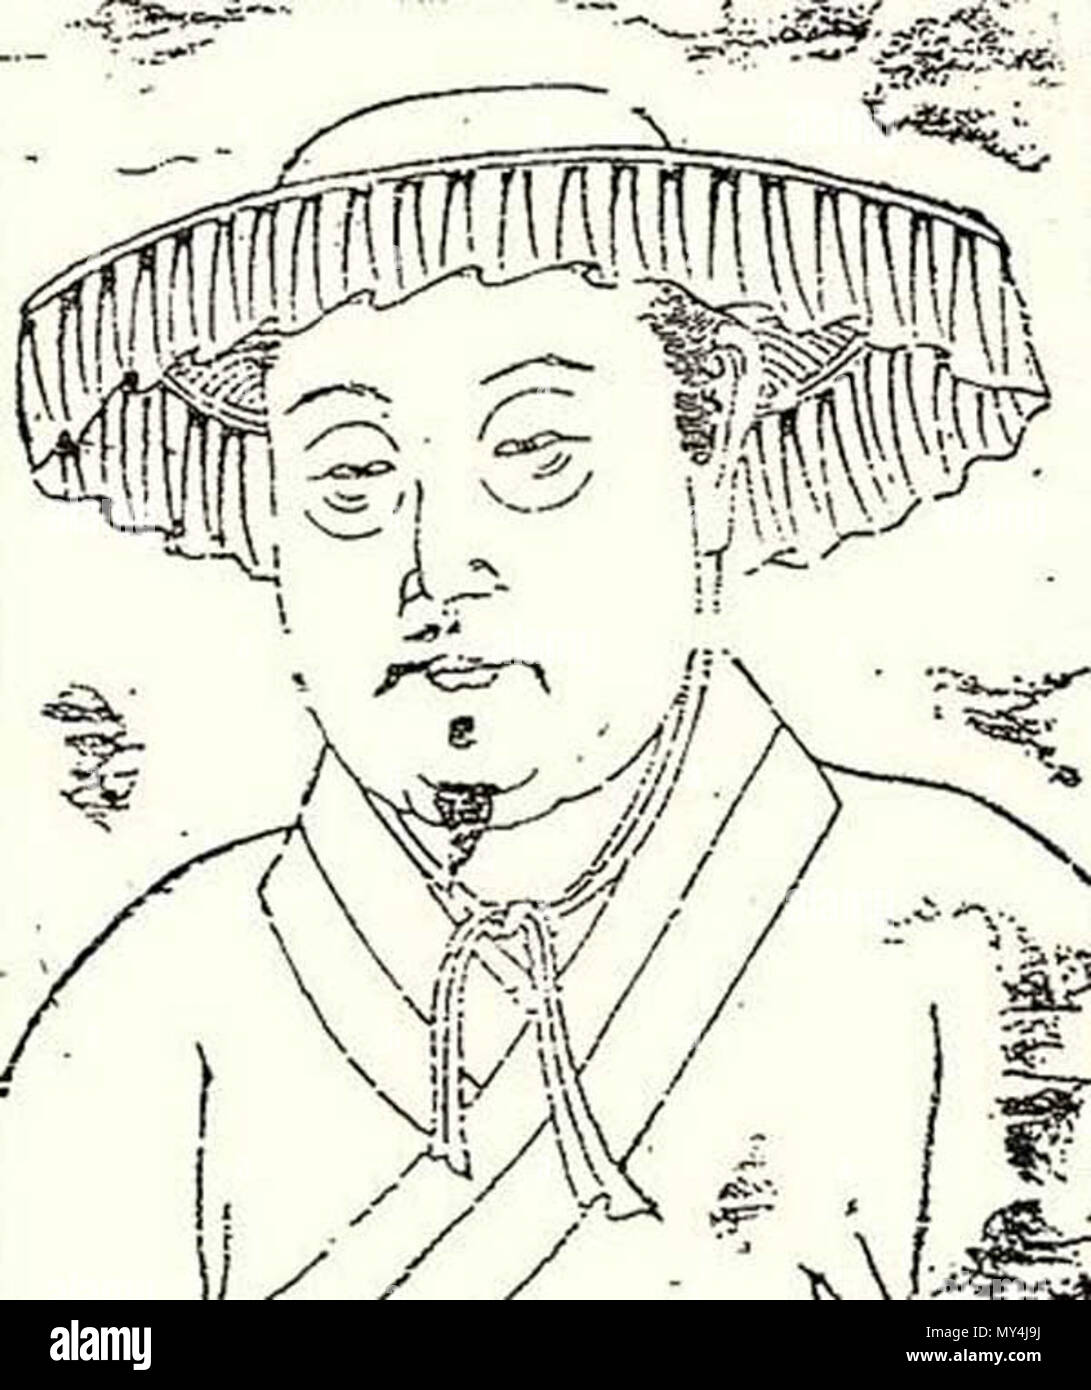 . English: Drawing of Zhang Yanghao (1270 - 1329), Yuan Dynasty poet and official. 16 July 2010, 21:20:29. Unknown 575 Zhang Yanghao Drawing Stock Photo